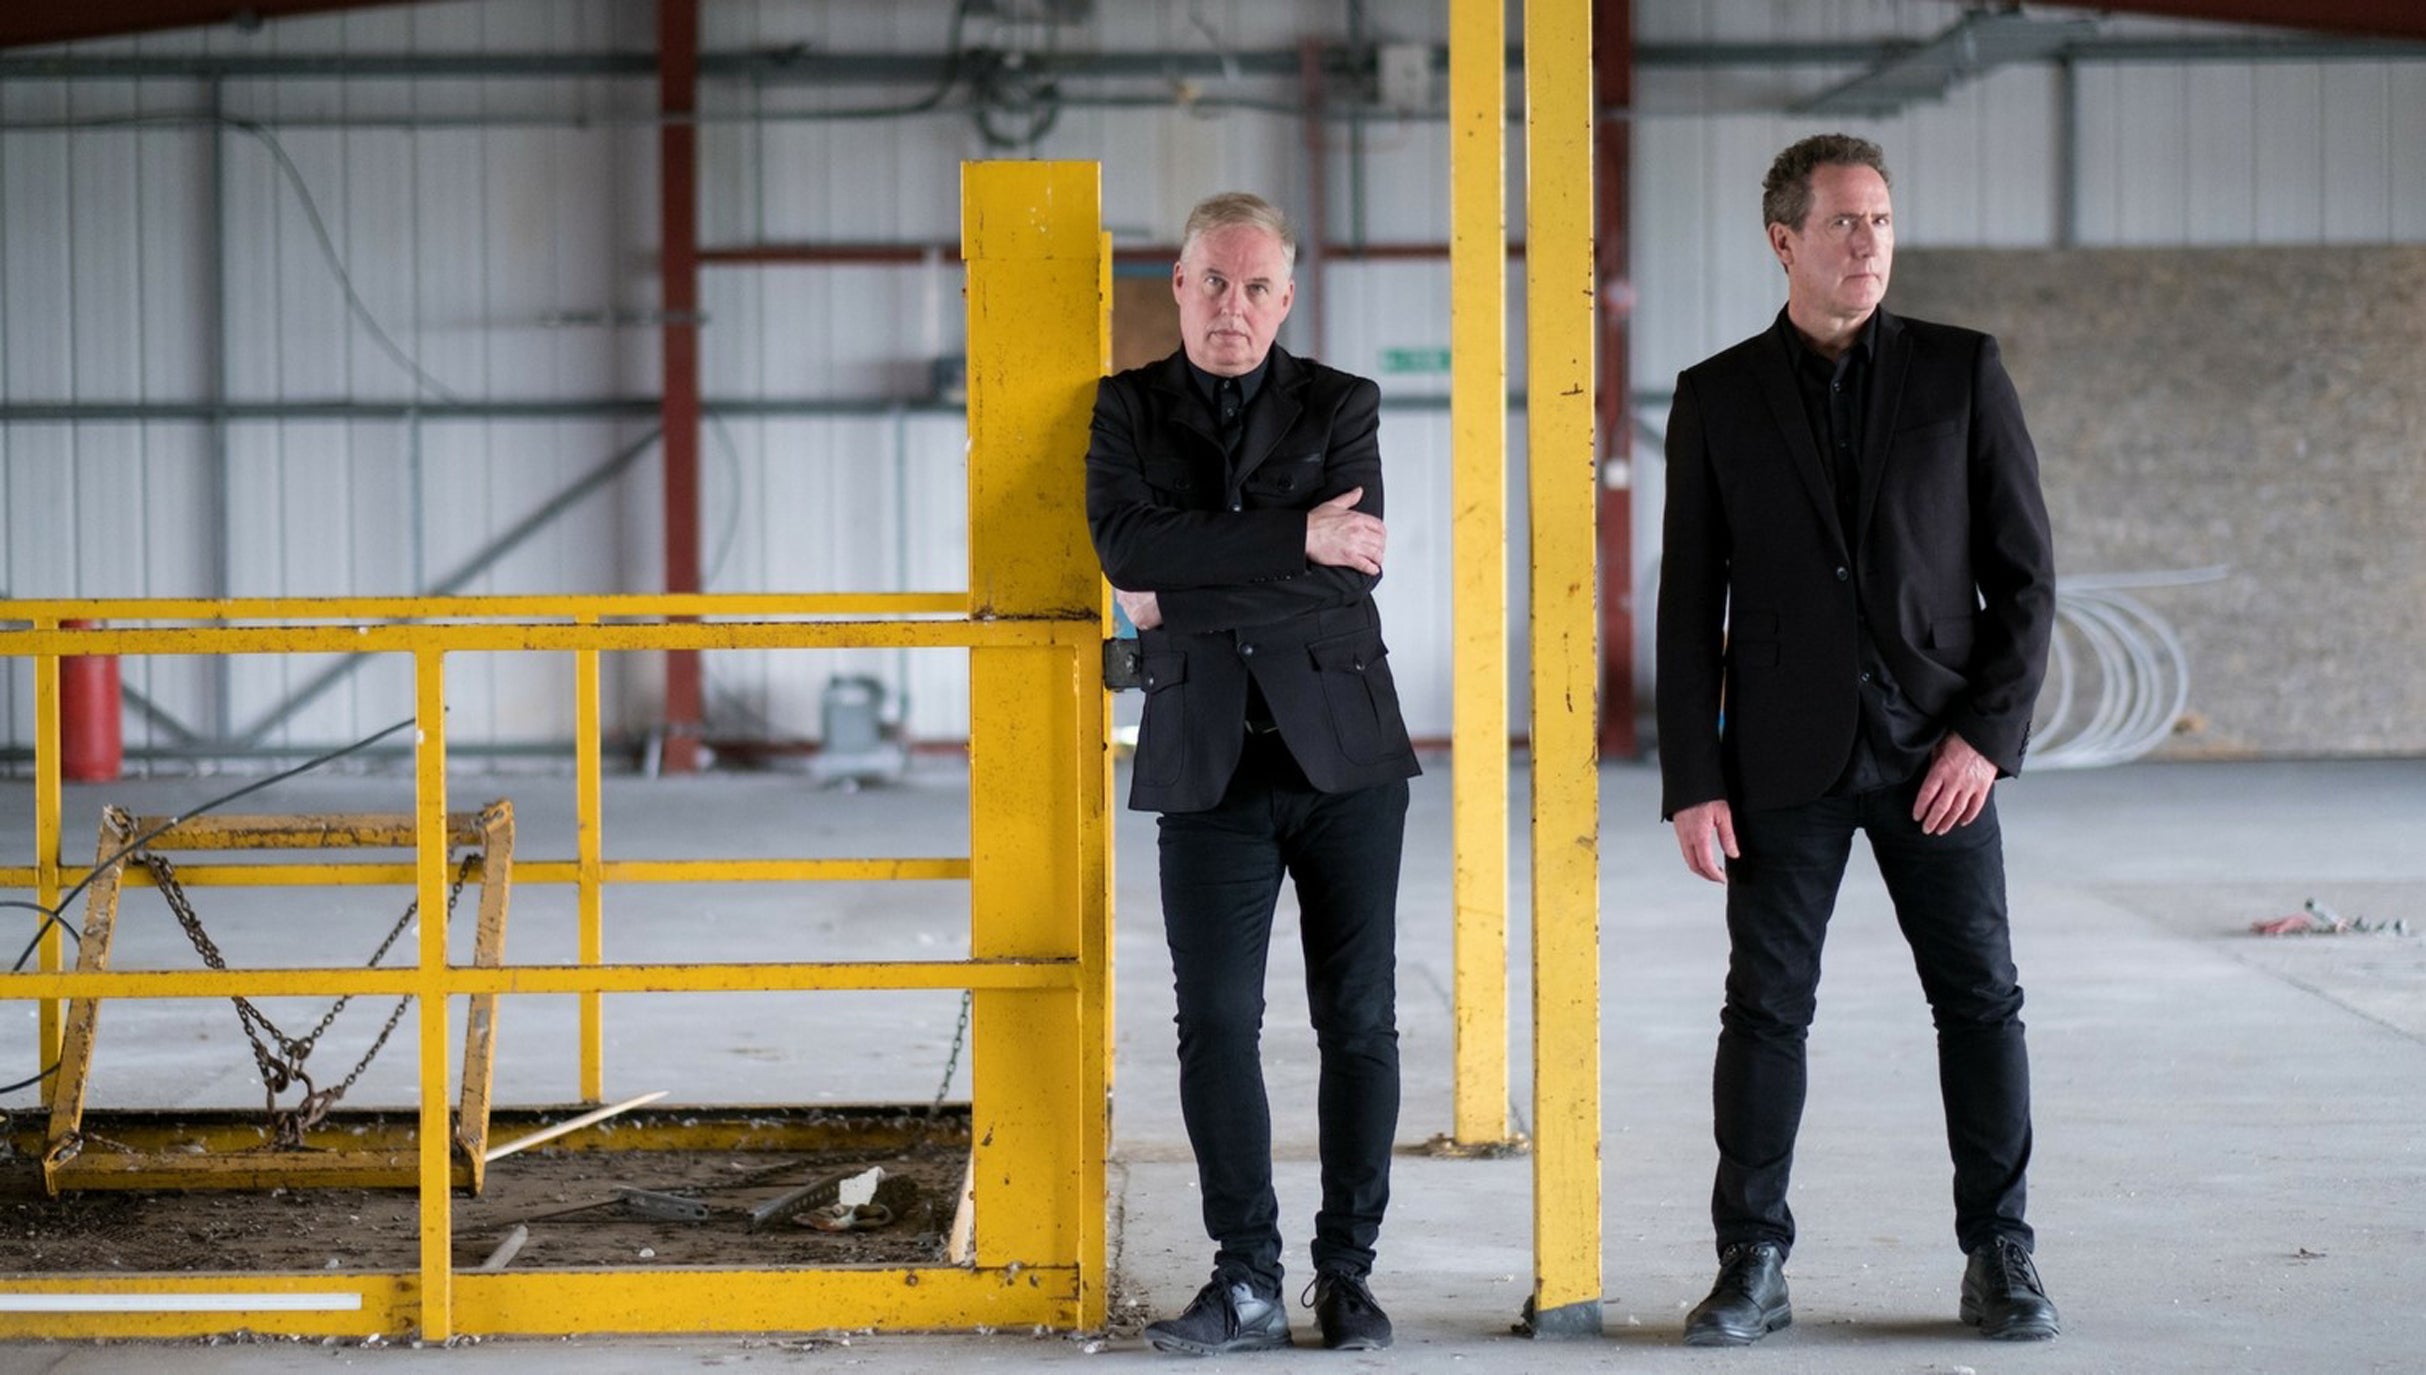 OMD - Orchestral Manoeuvres in the Dark pre-sale password for show tickets in Huntington, NY (The Paramount)